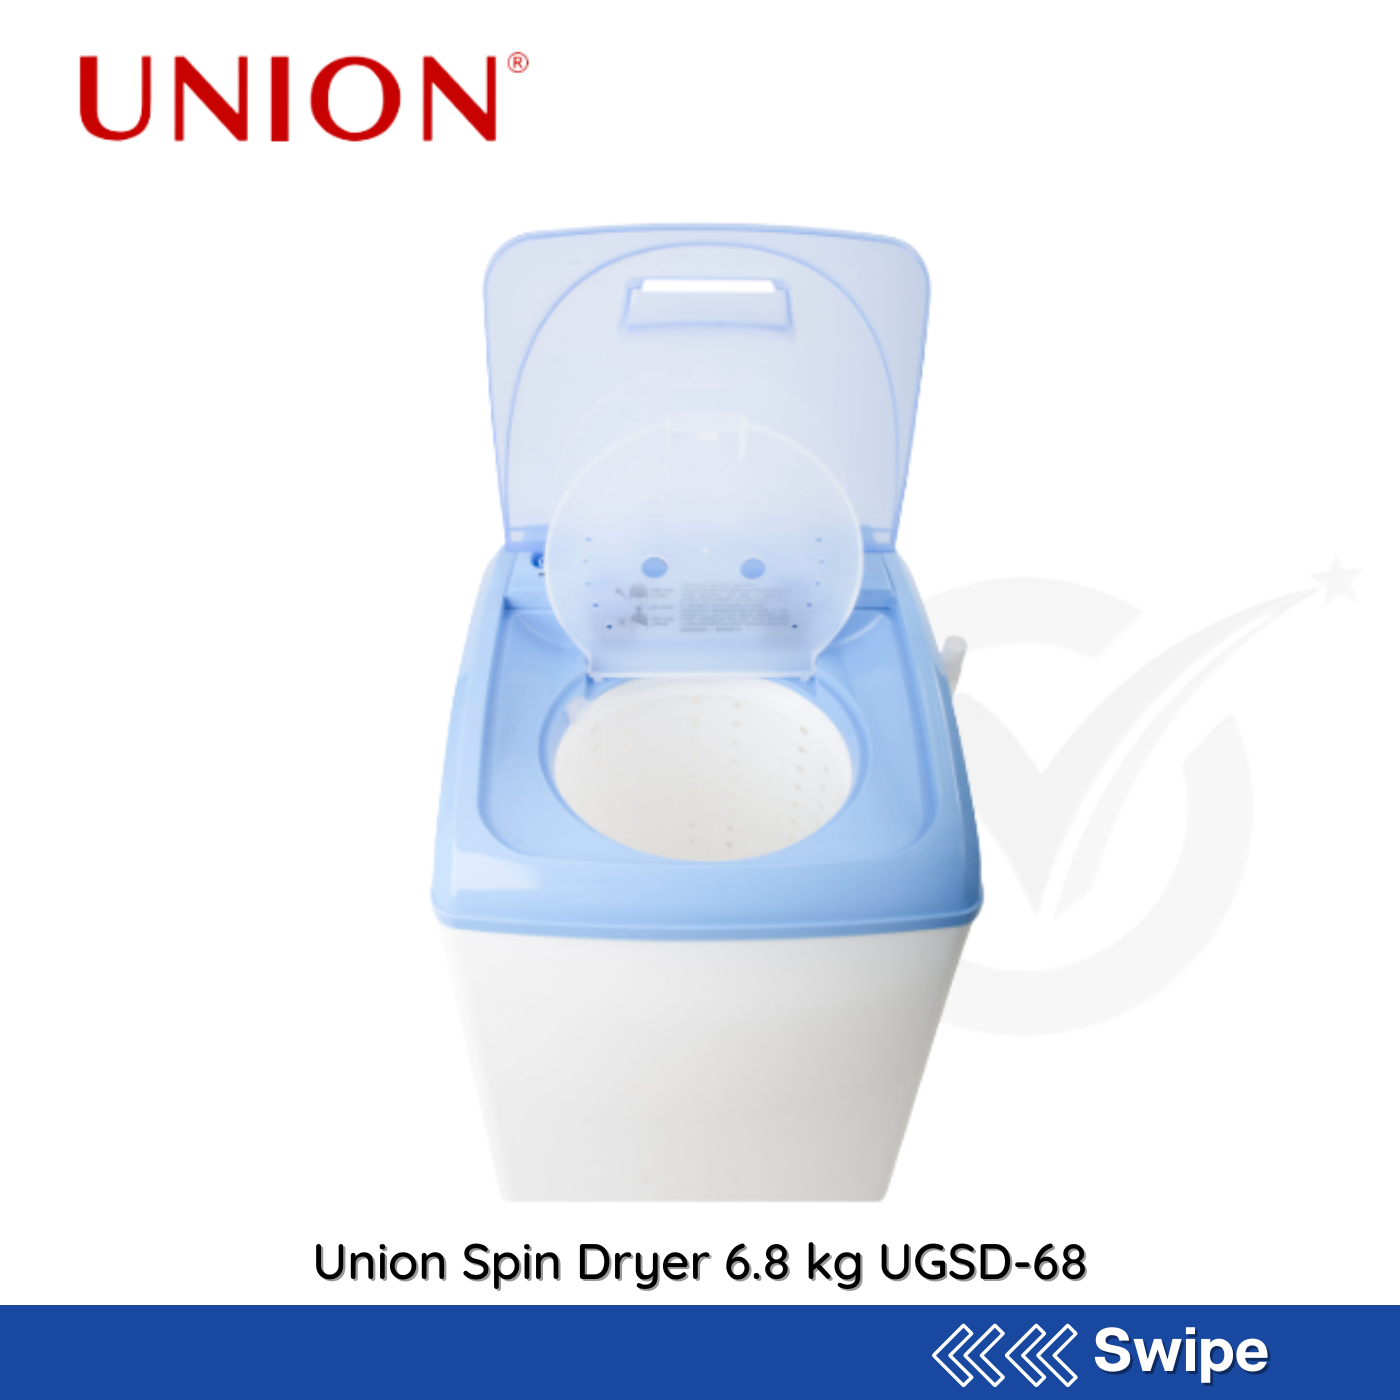 Union Spin Dryer 6.8 kg UGSD-68 - People's Choice Marketing